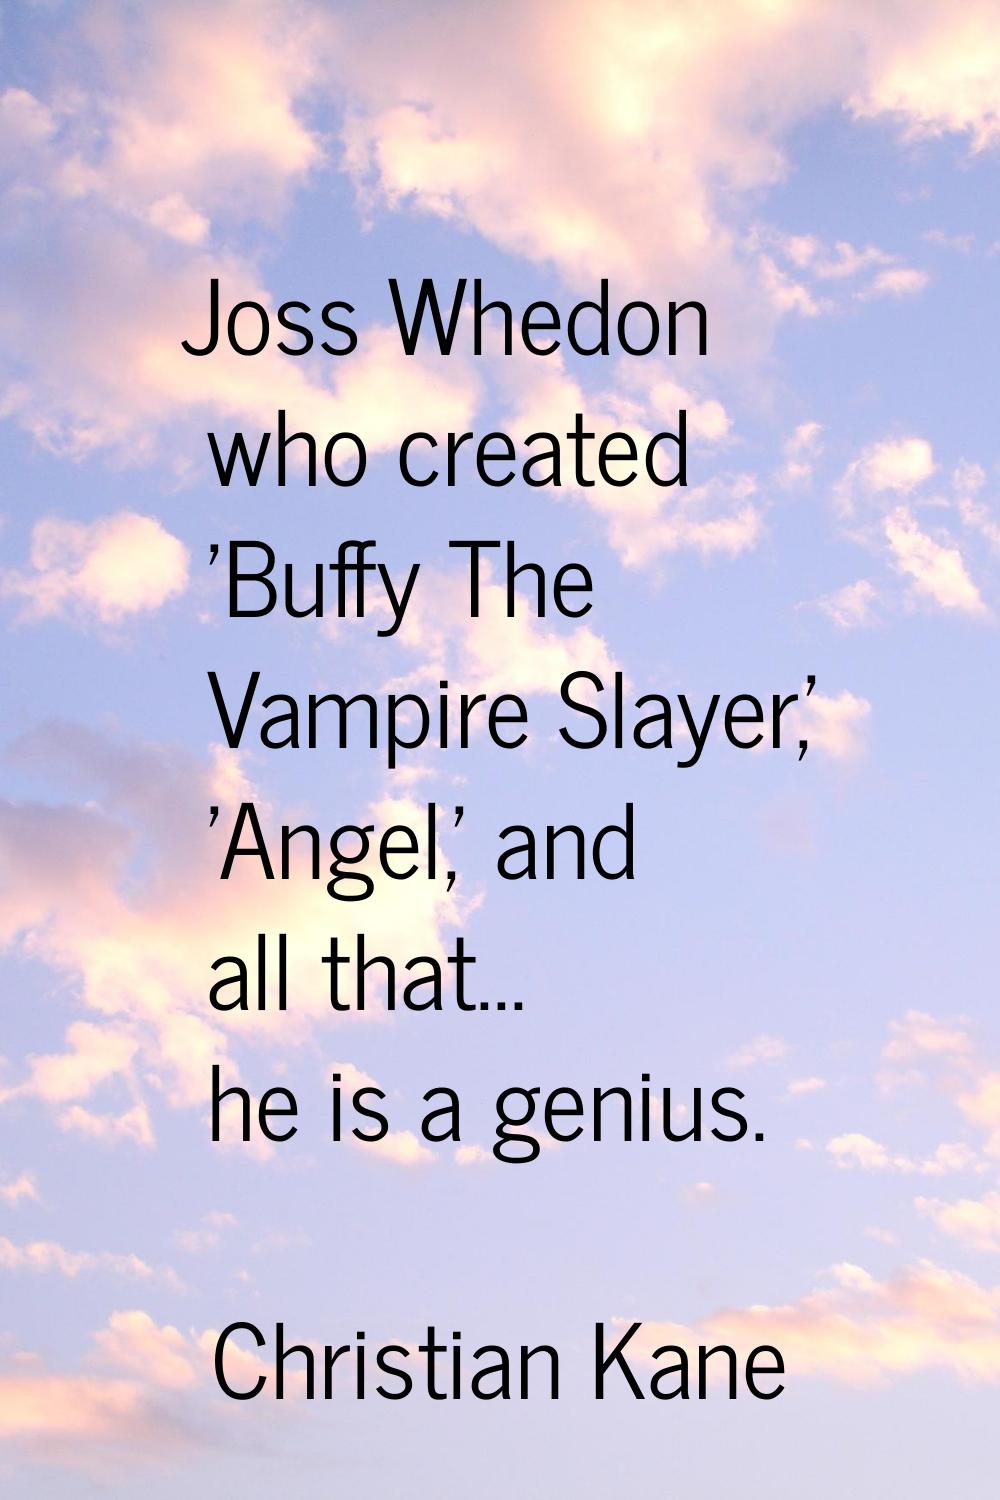 Joss Whedon who created 'Buffy The Vampire Slayer,' 'Angel,' and all that... he is a genius.